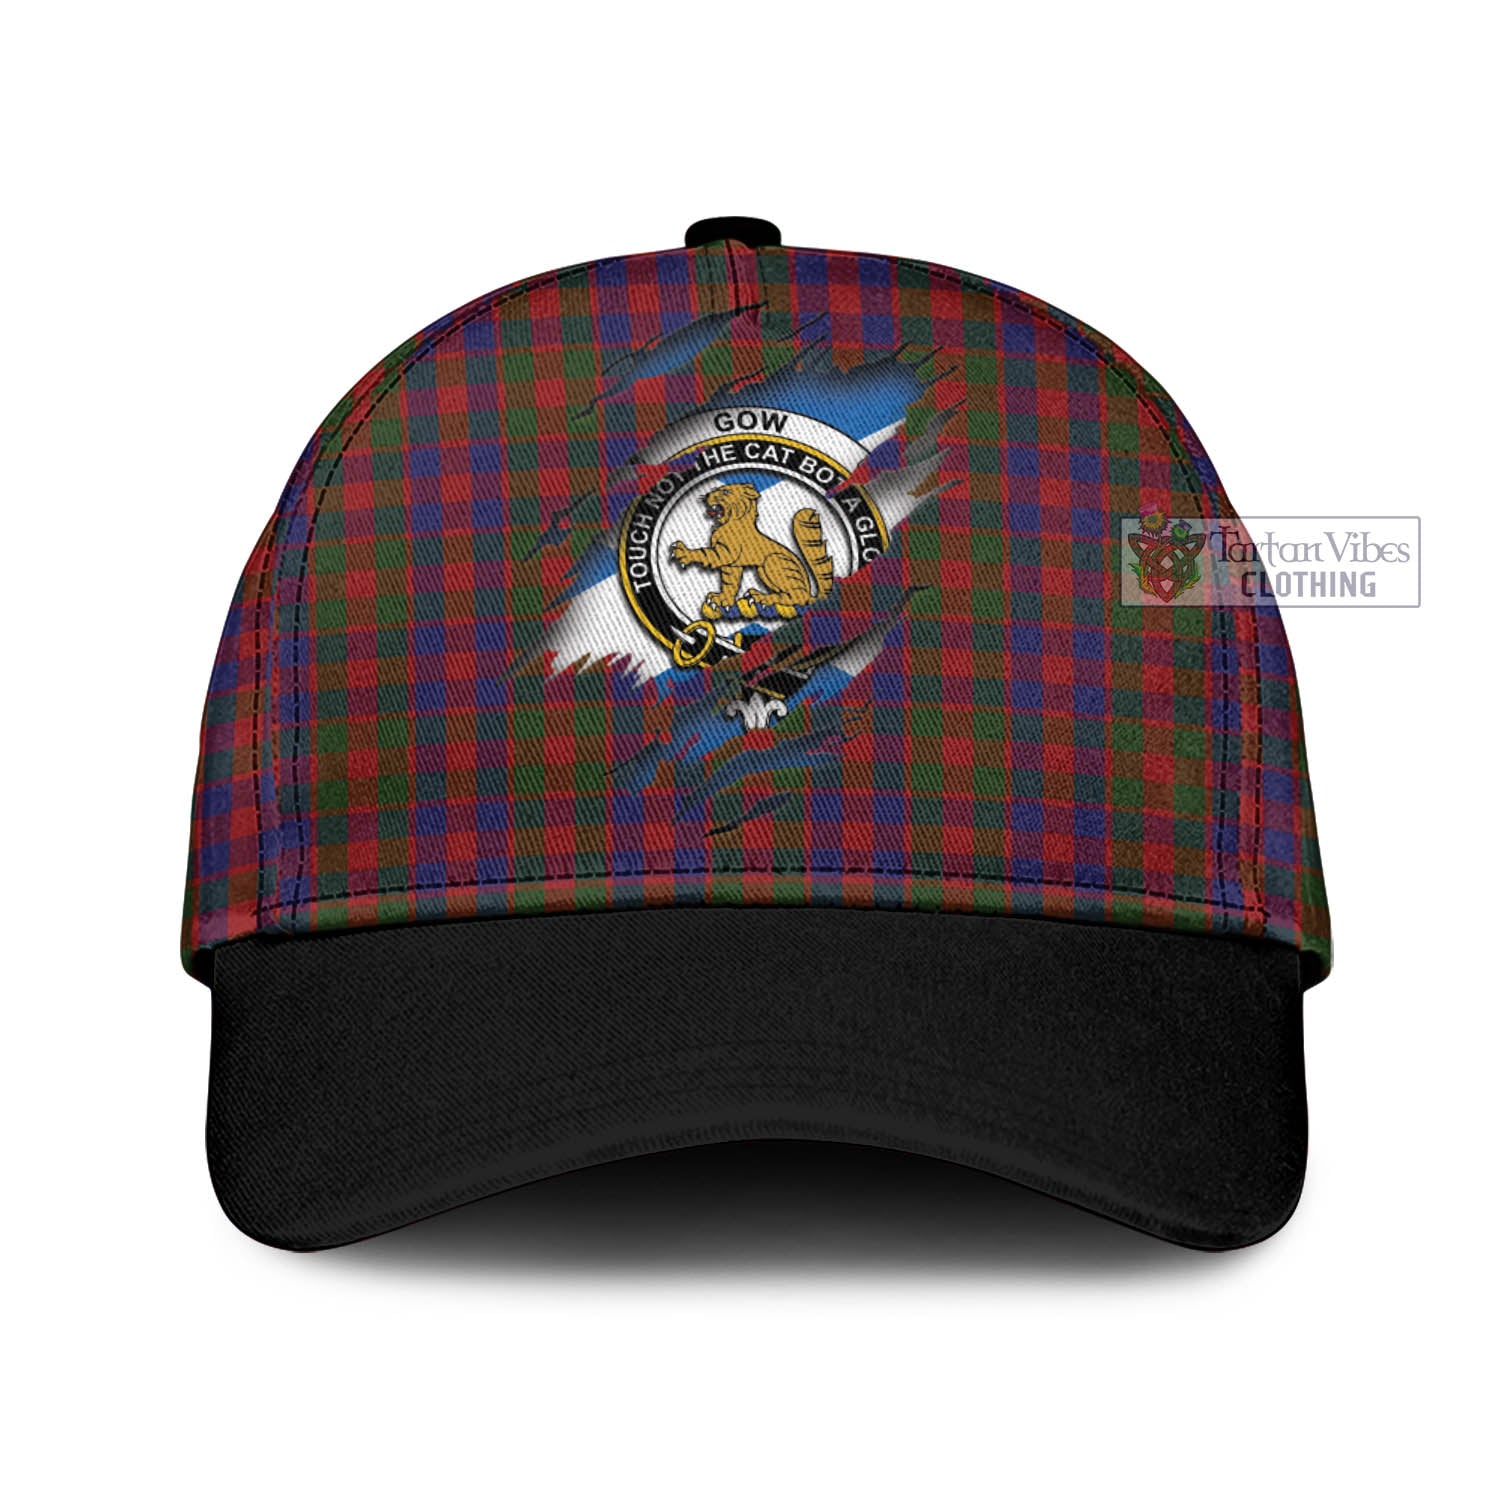 Tartan Vibes Clothing Gow Tartan Classic Cap with Family Crest In Me Style